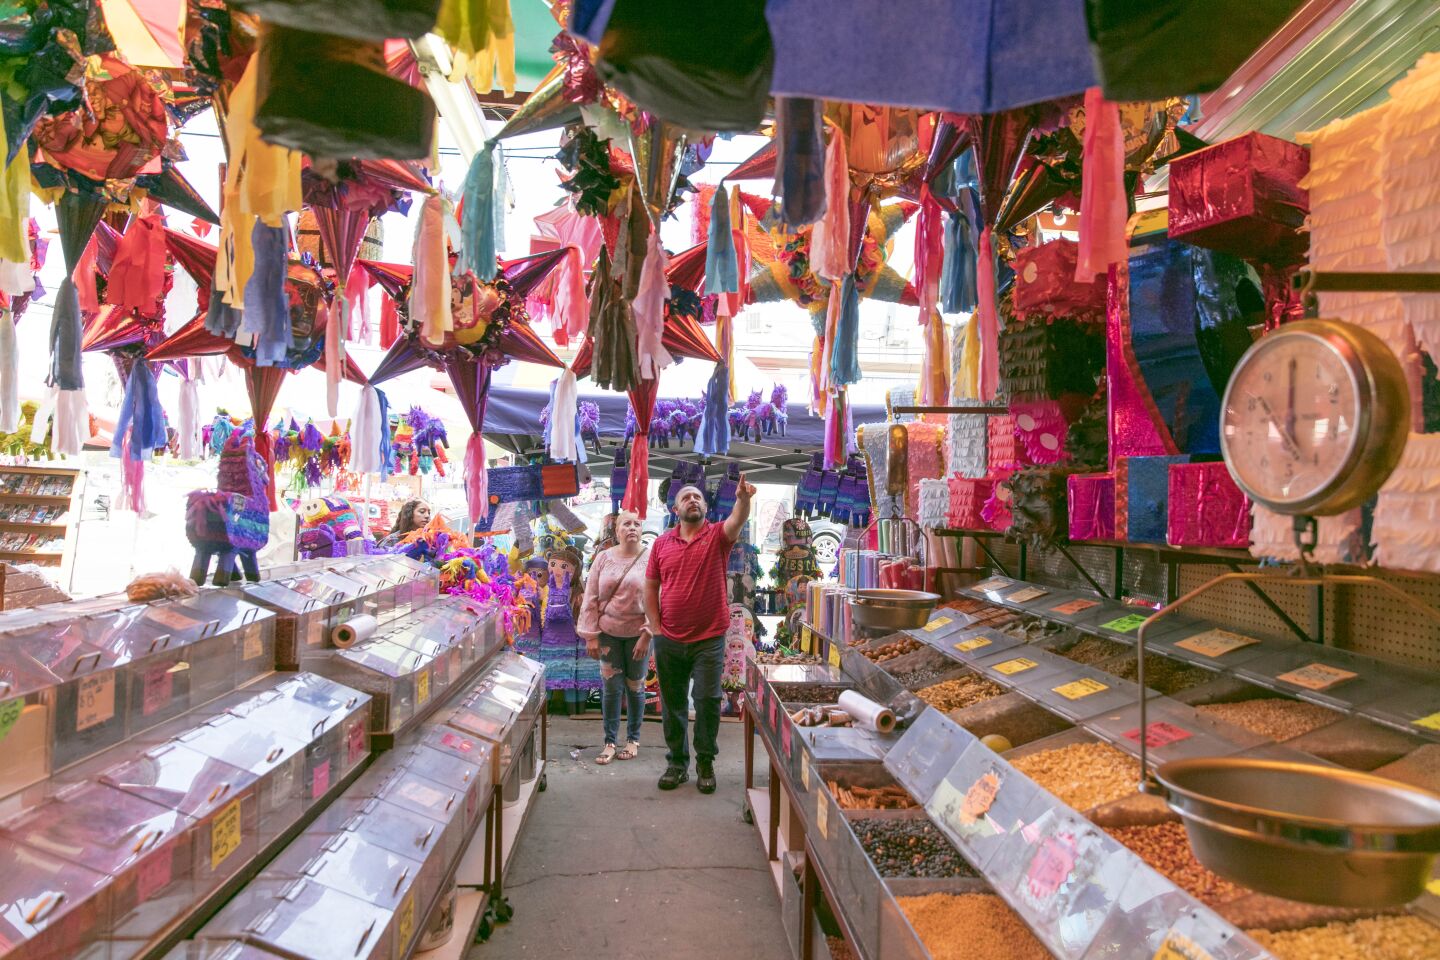 People shop at Tapia's Productos Mexicanos en General, the first and oldest store in the Piñata District.